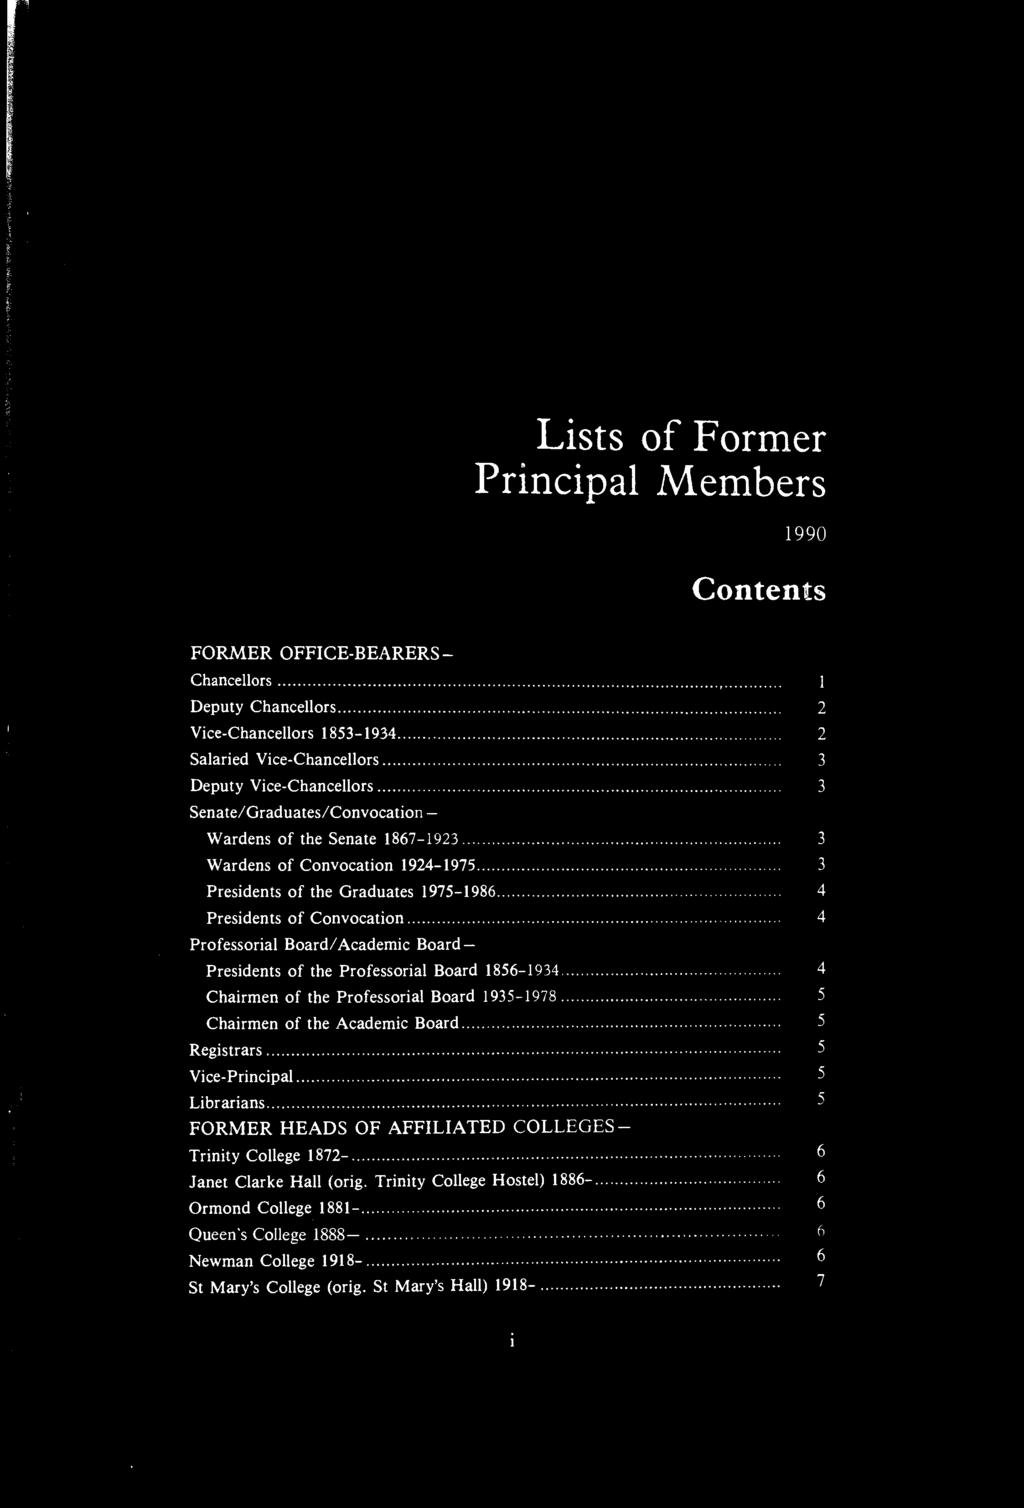 Lists of Former Principal Members 1990 Contents FORMER OFFICE-BEARERS Chancellors 1 Deputy Chancellors 2 Vice-Chancellors 1853-1934 2 Salaried Vice-Chancellors 3 Deputy Vice-Chancellors 3